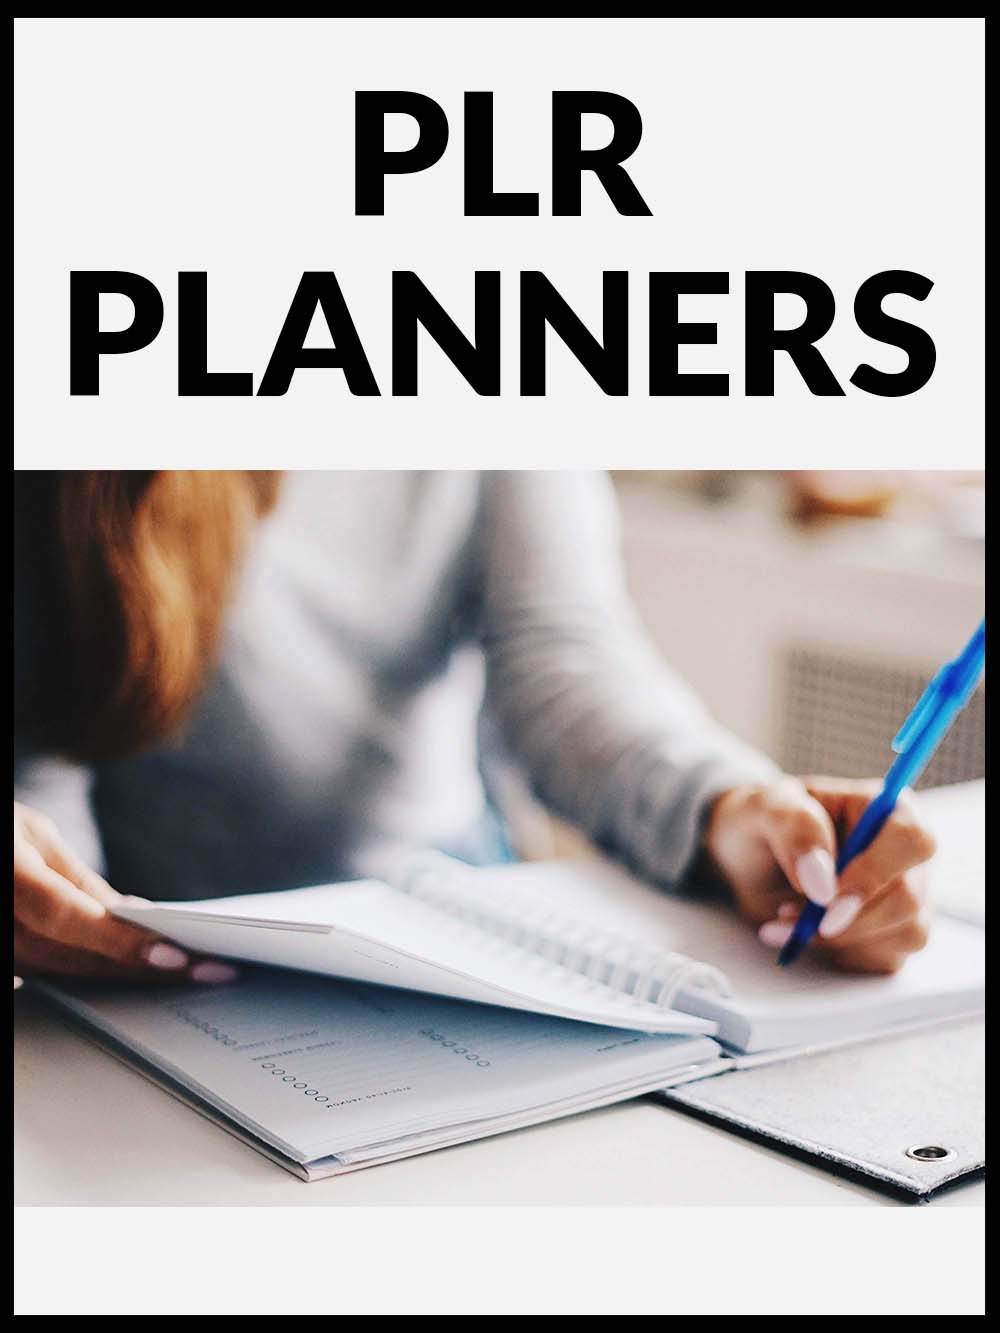 best PLR planners and websites to buy and resell them